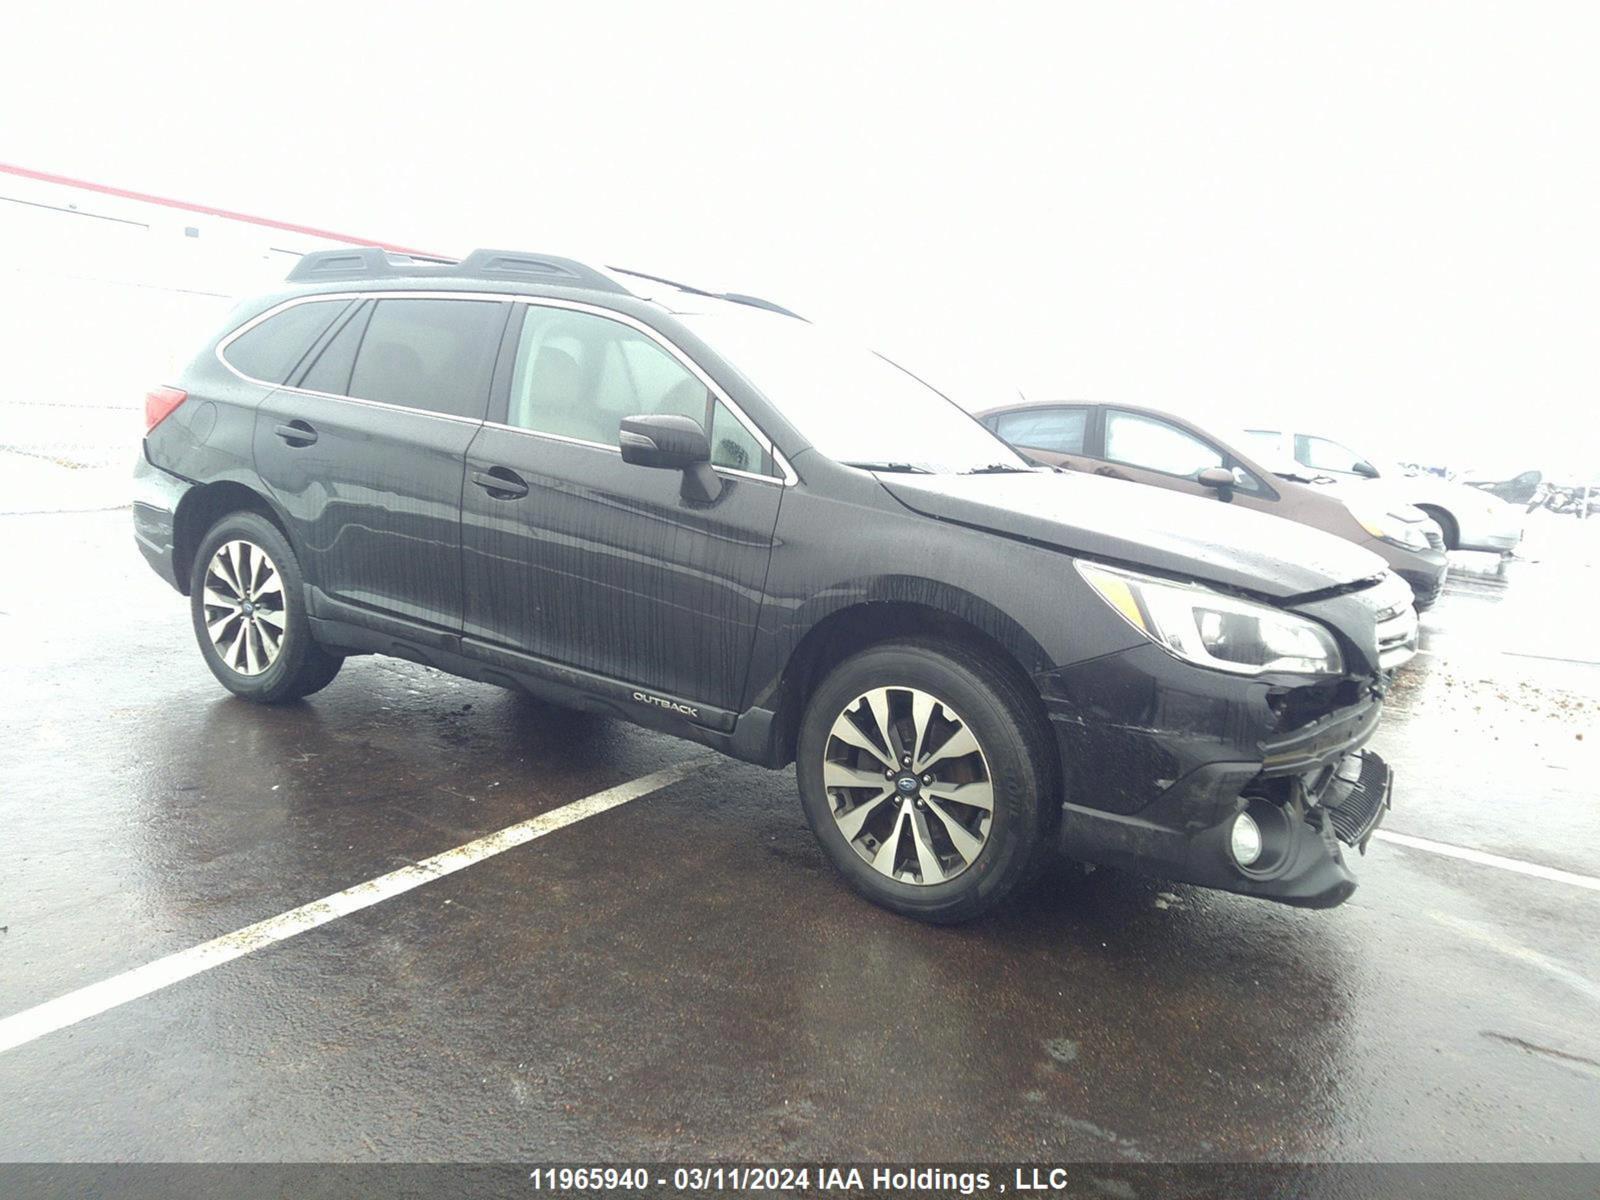 VIN: 4S4BSCLC7G3247644 - subaru outback